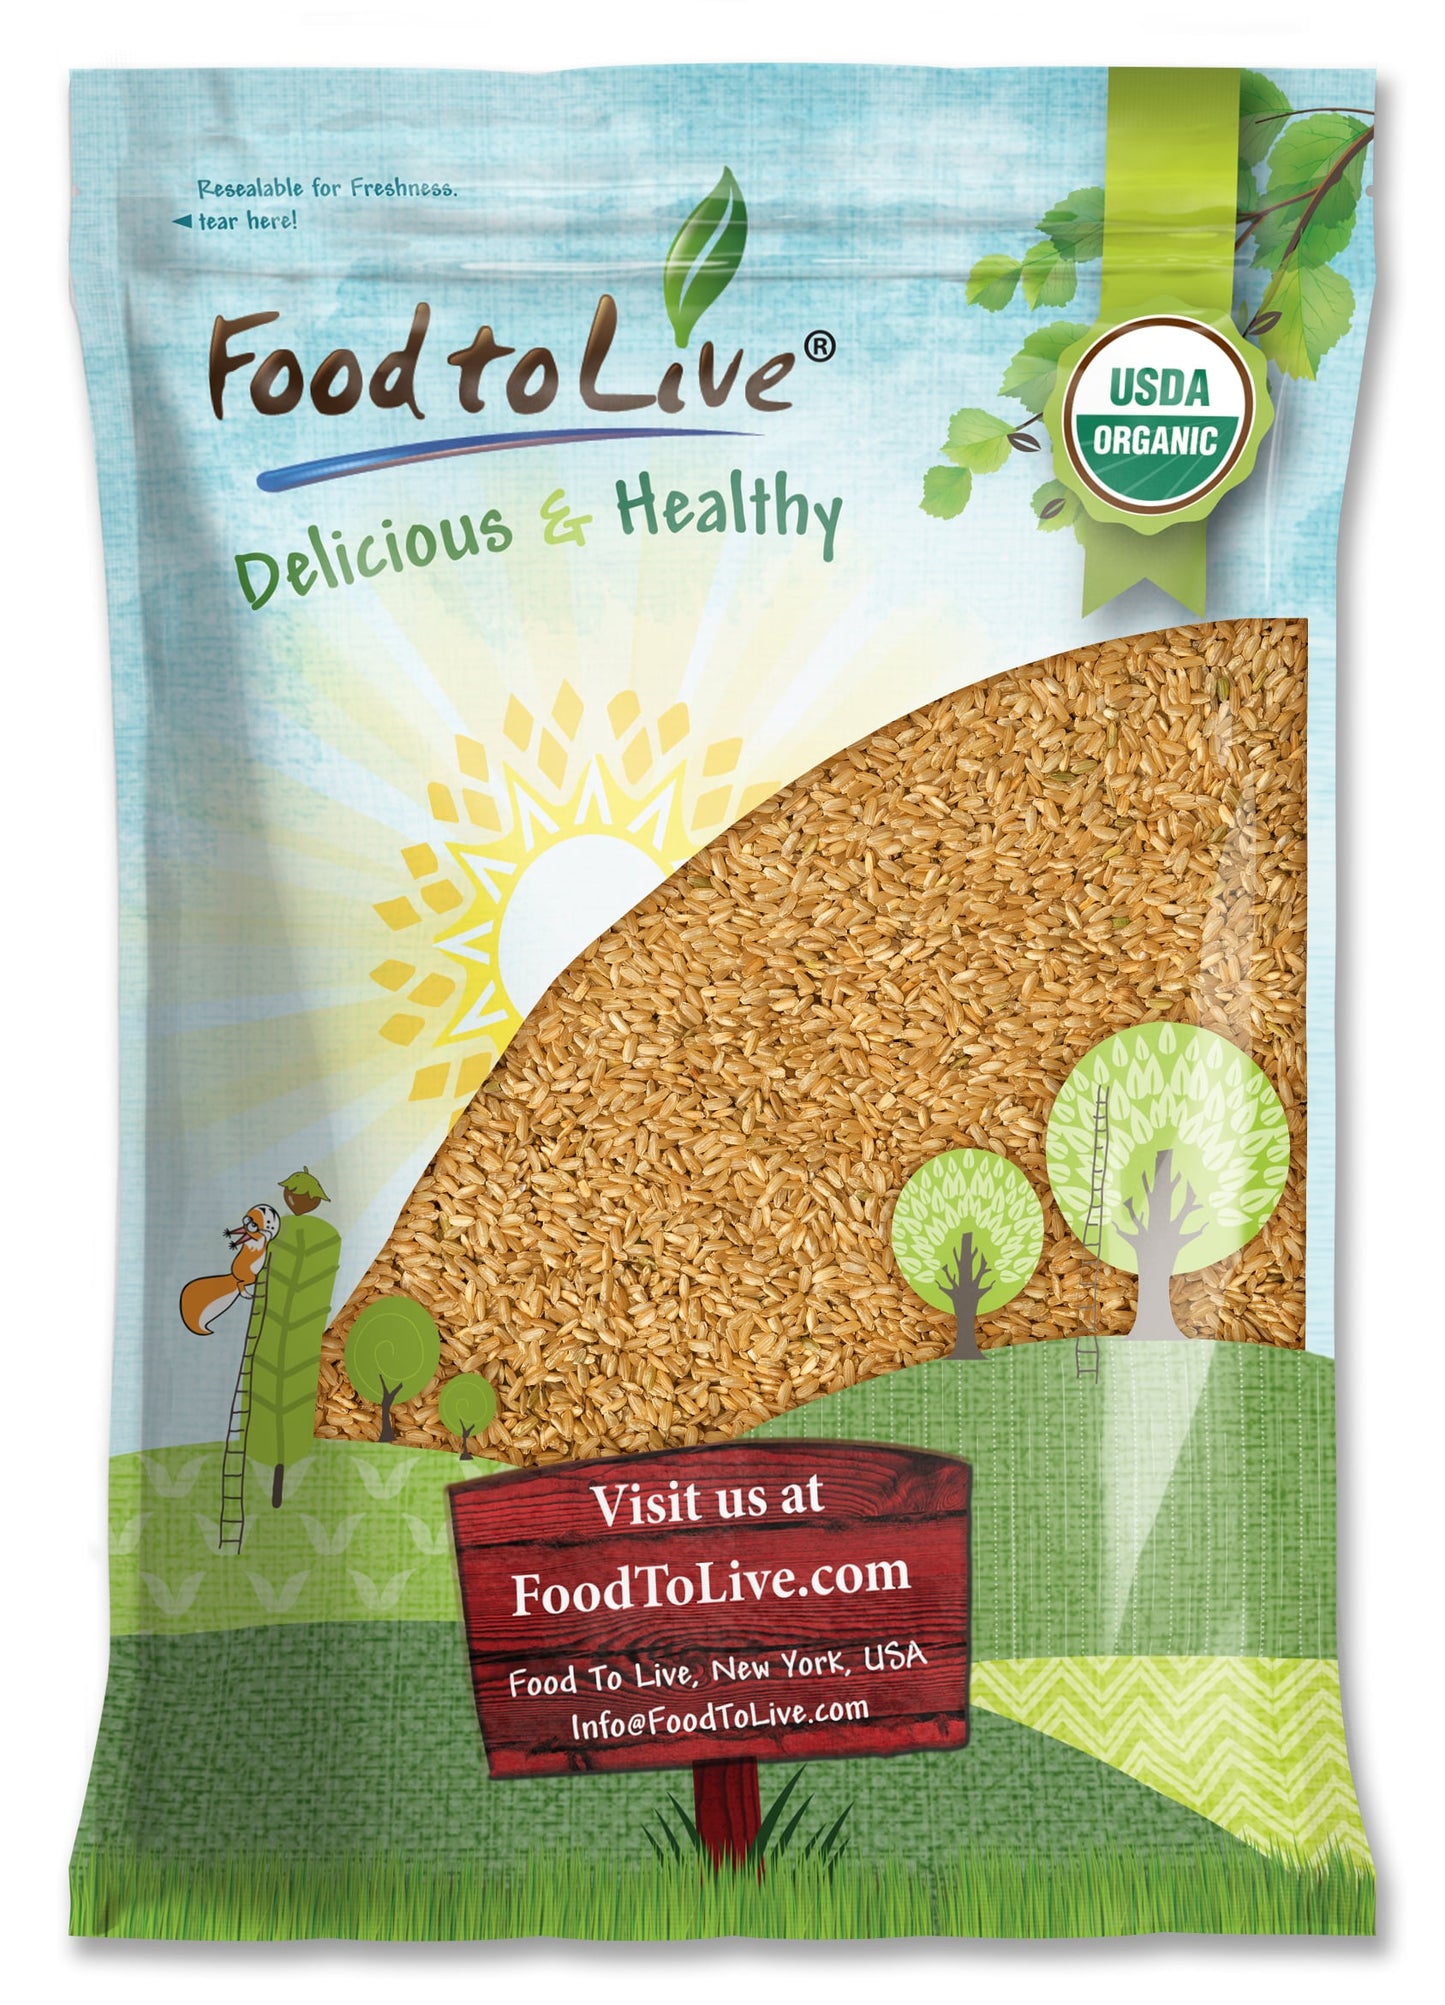 Organic Parboiled Long Grain Brown Rice - Non-GMO Whole Grain, Kosher, Vegan, Bulk. Partially Precooked Converted Rice. Easy-cook Rice is Great for Making Idlis and Dosas. Rich in Vitamins